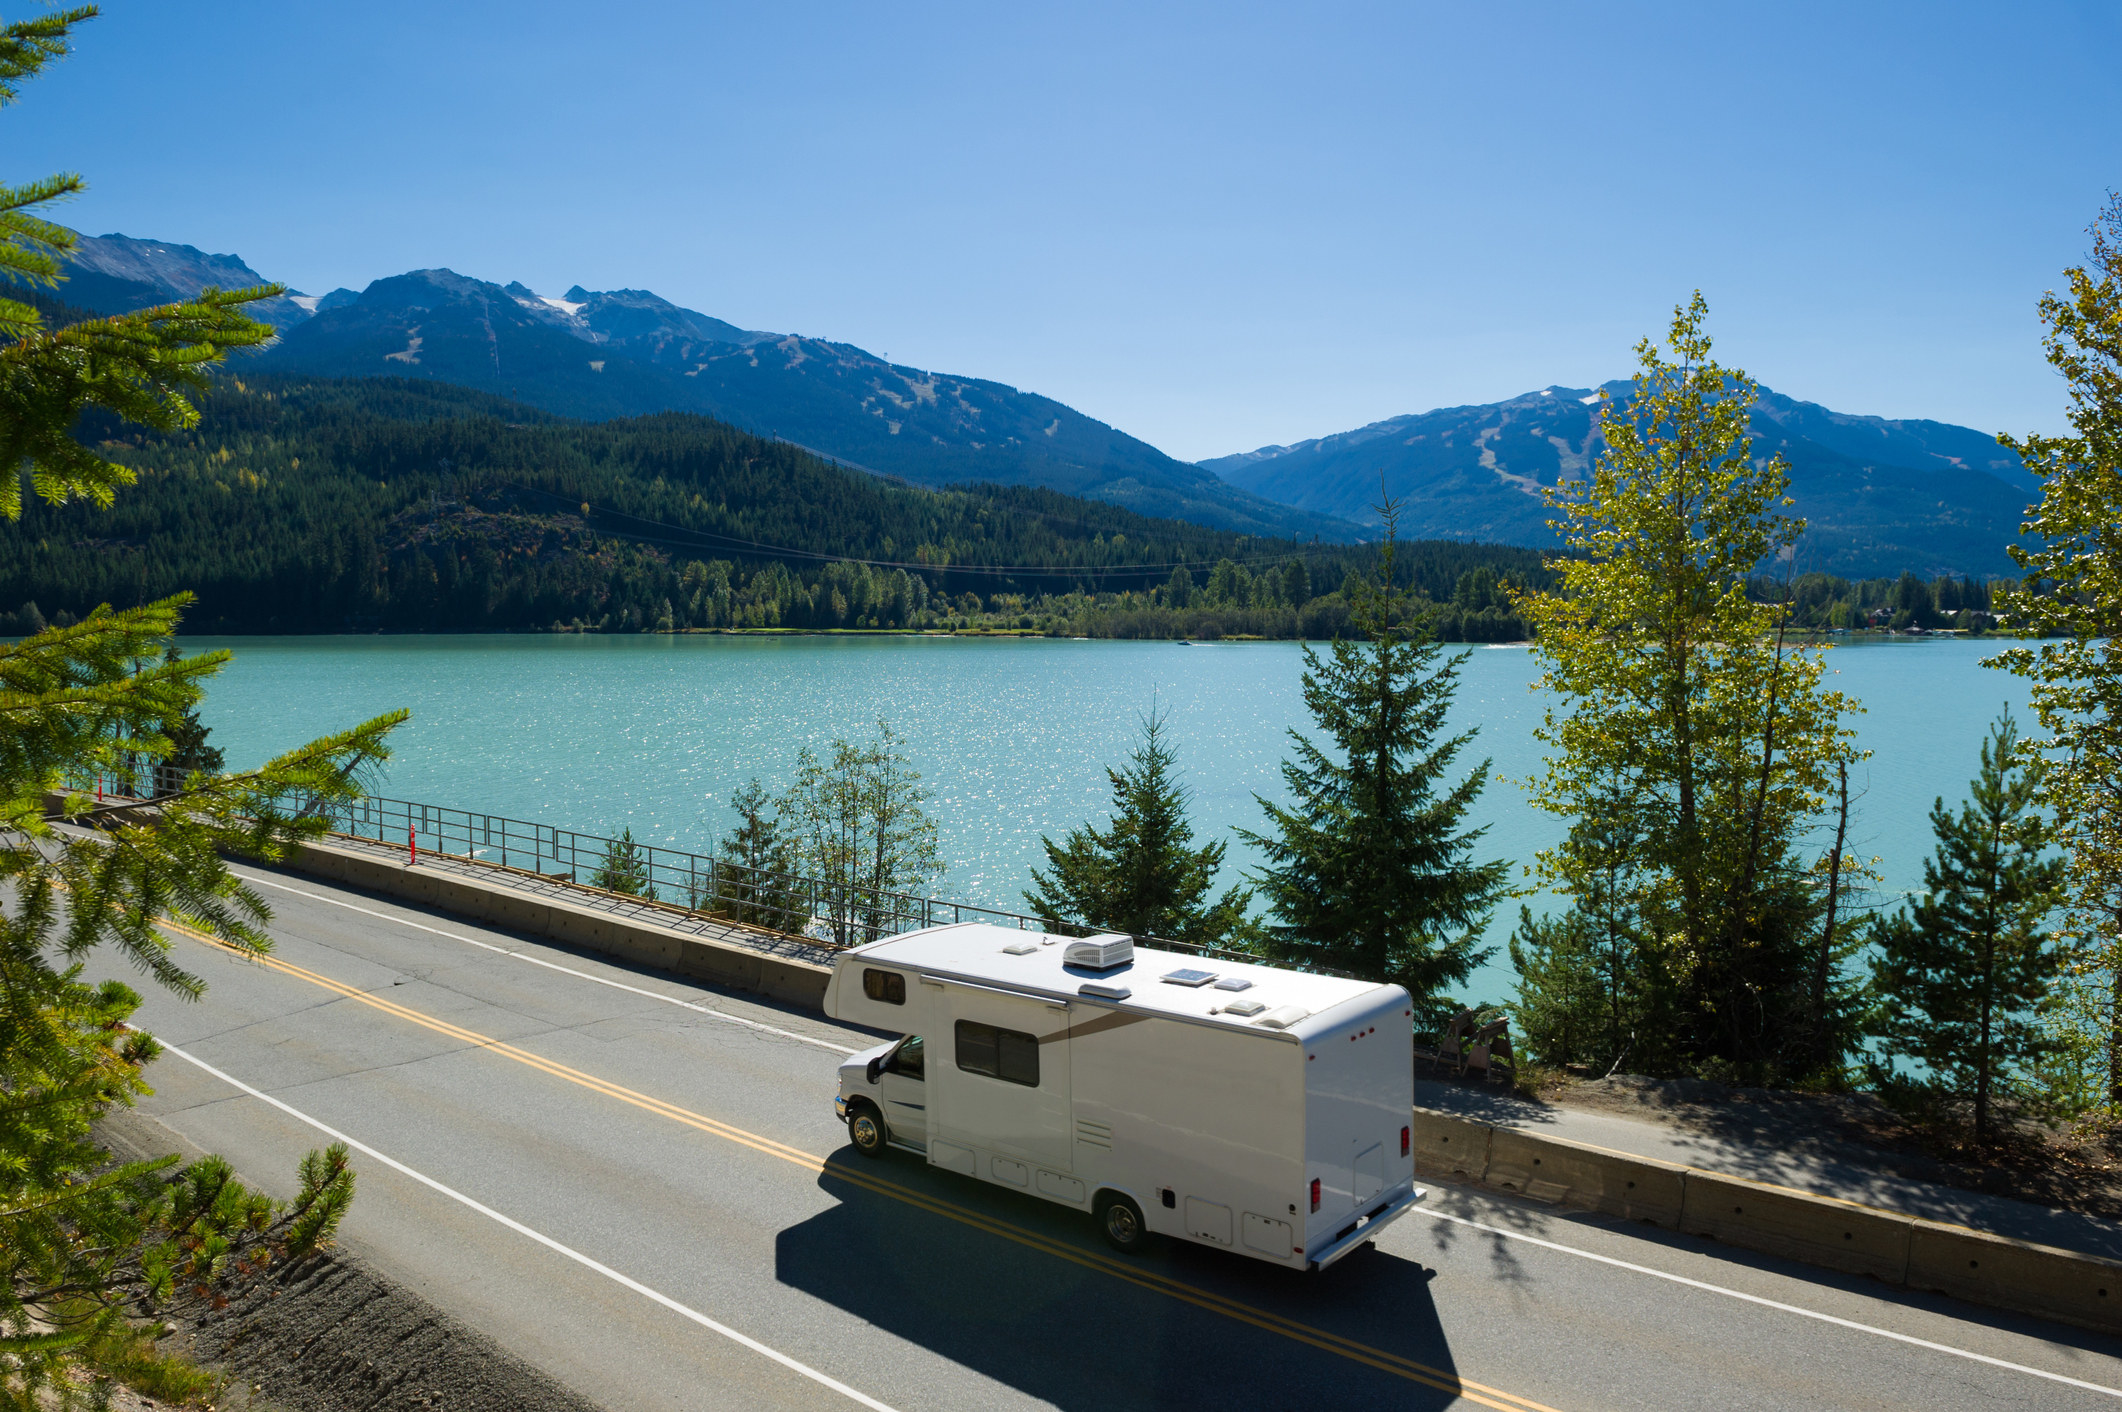 An RV driving on a road beside a lake